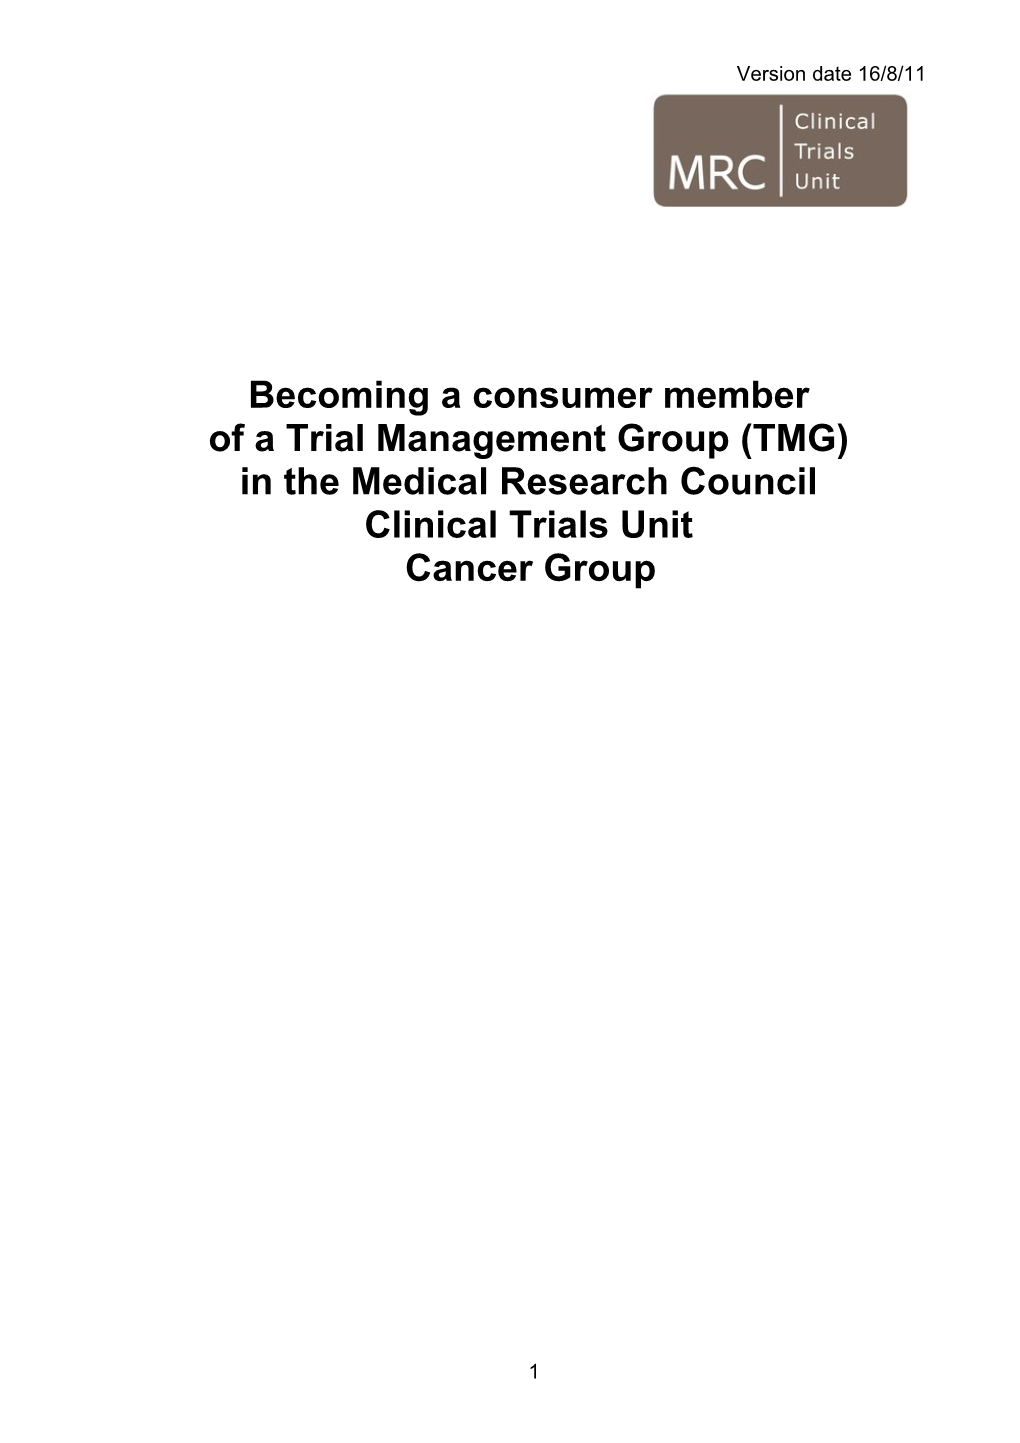 Becoming a Consumer Member of a Trial Management Group in The